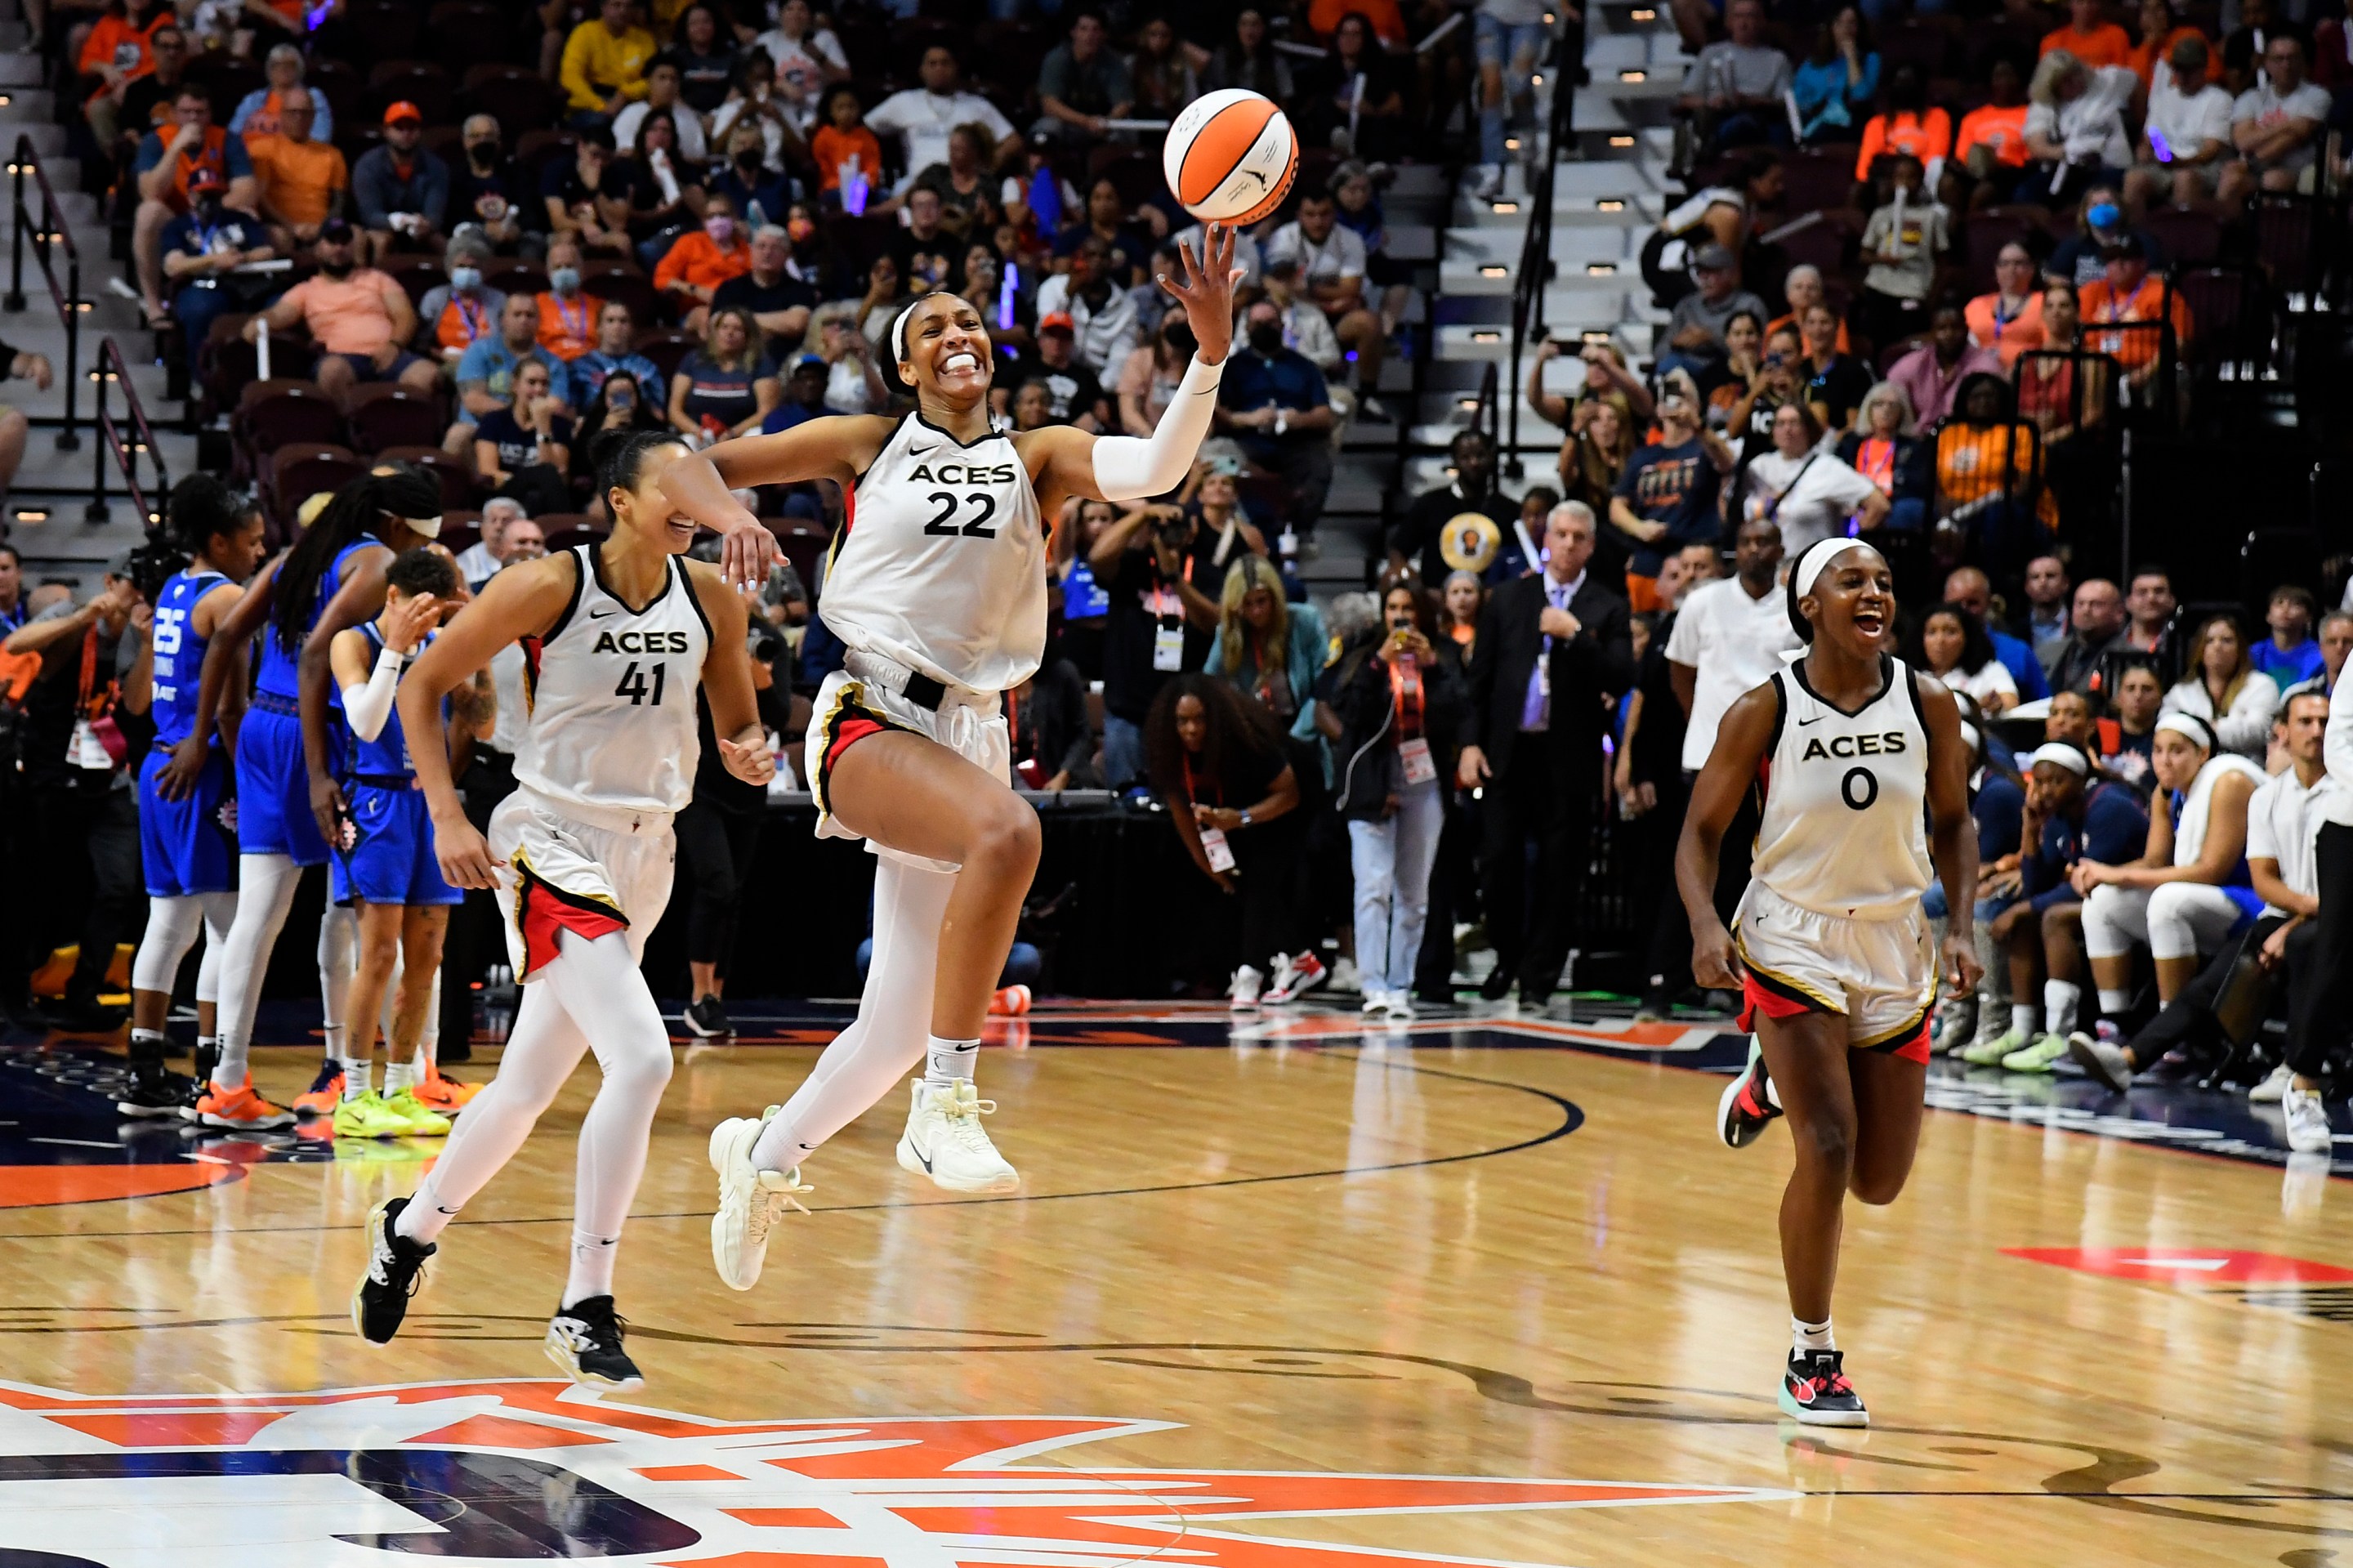 The Las Vegas Aces celebrate after Game 4 of the 2022 WNBA Finals on September 18, 2022 at Mohegan Sun Arena in Uncasville, Connecticut.